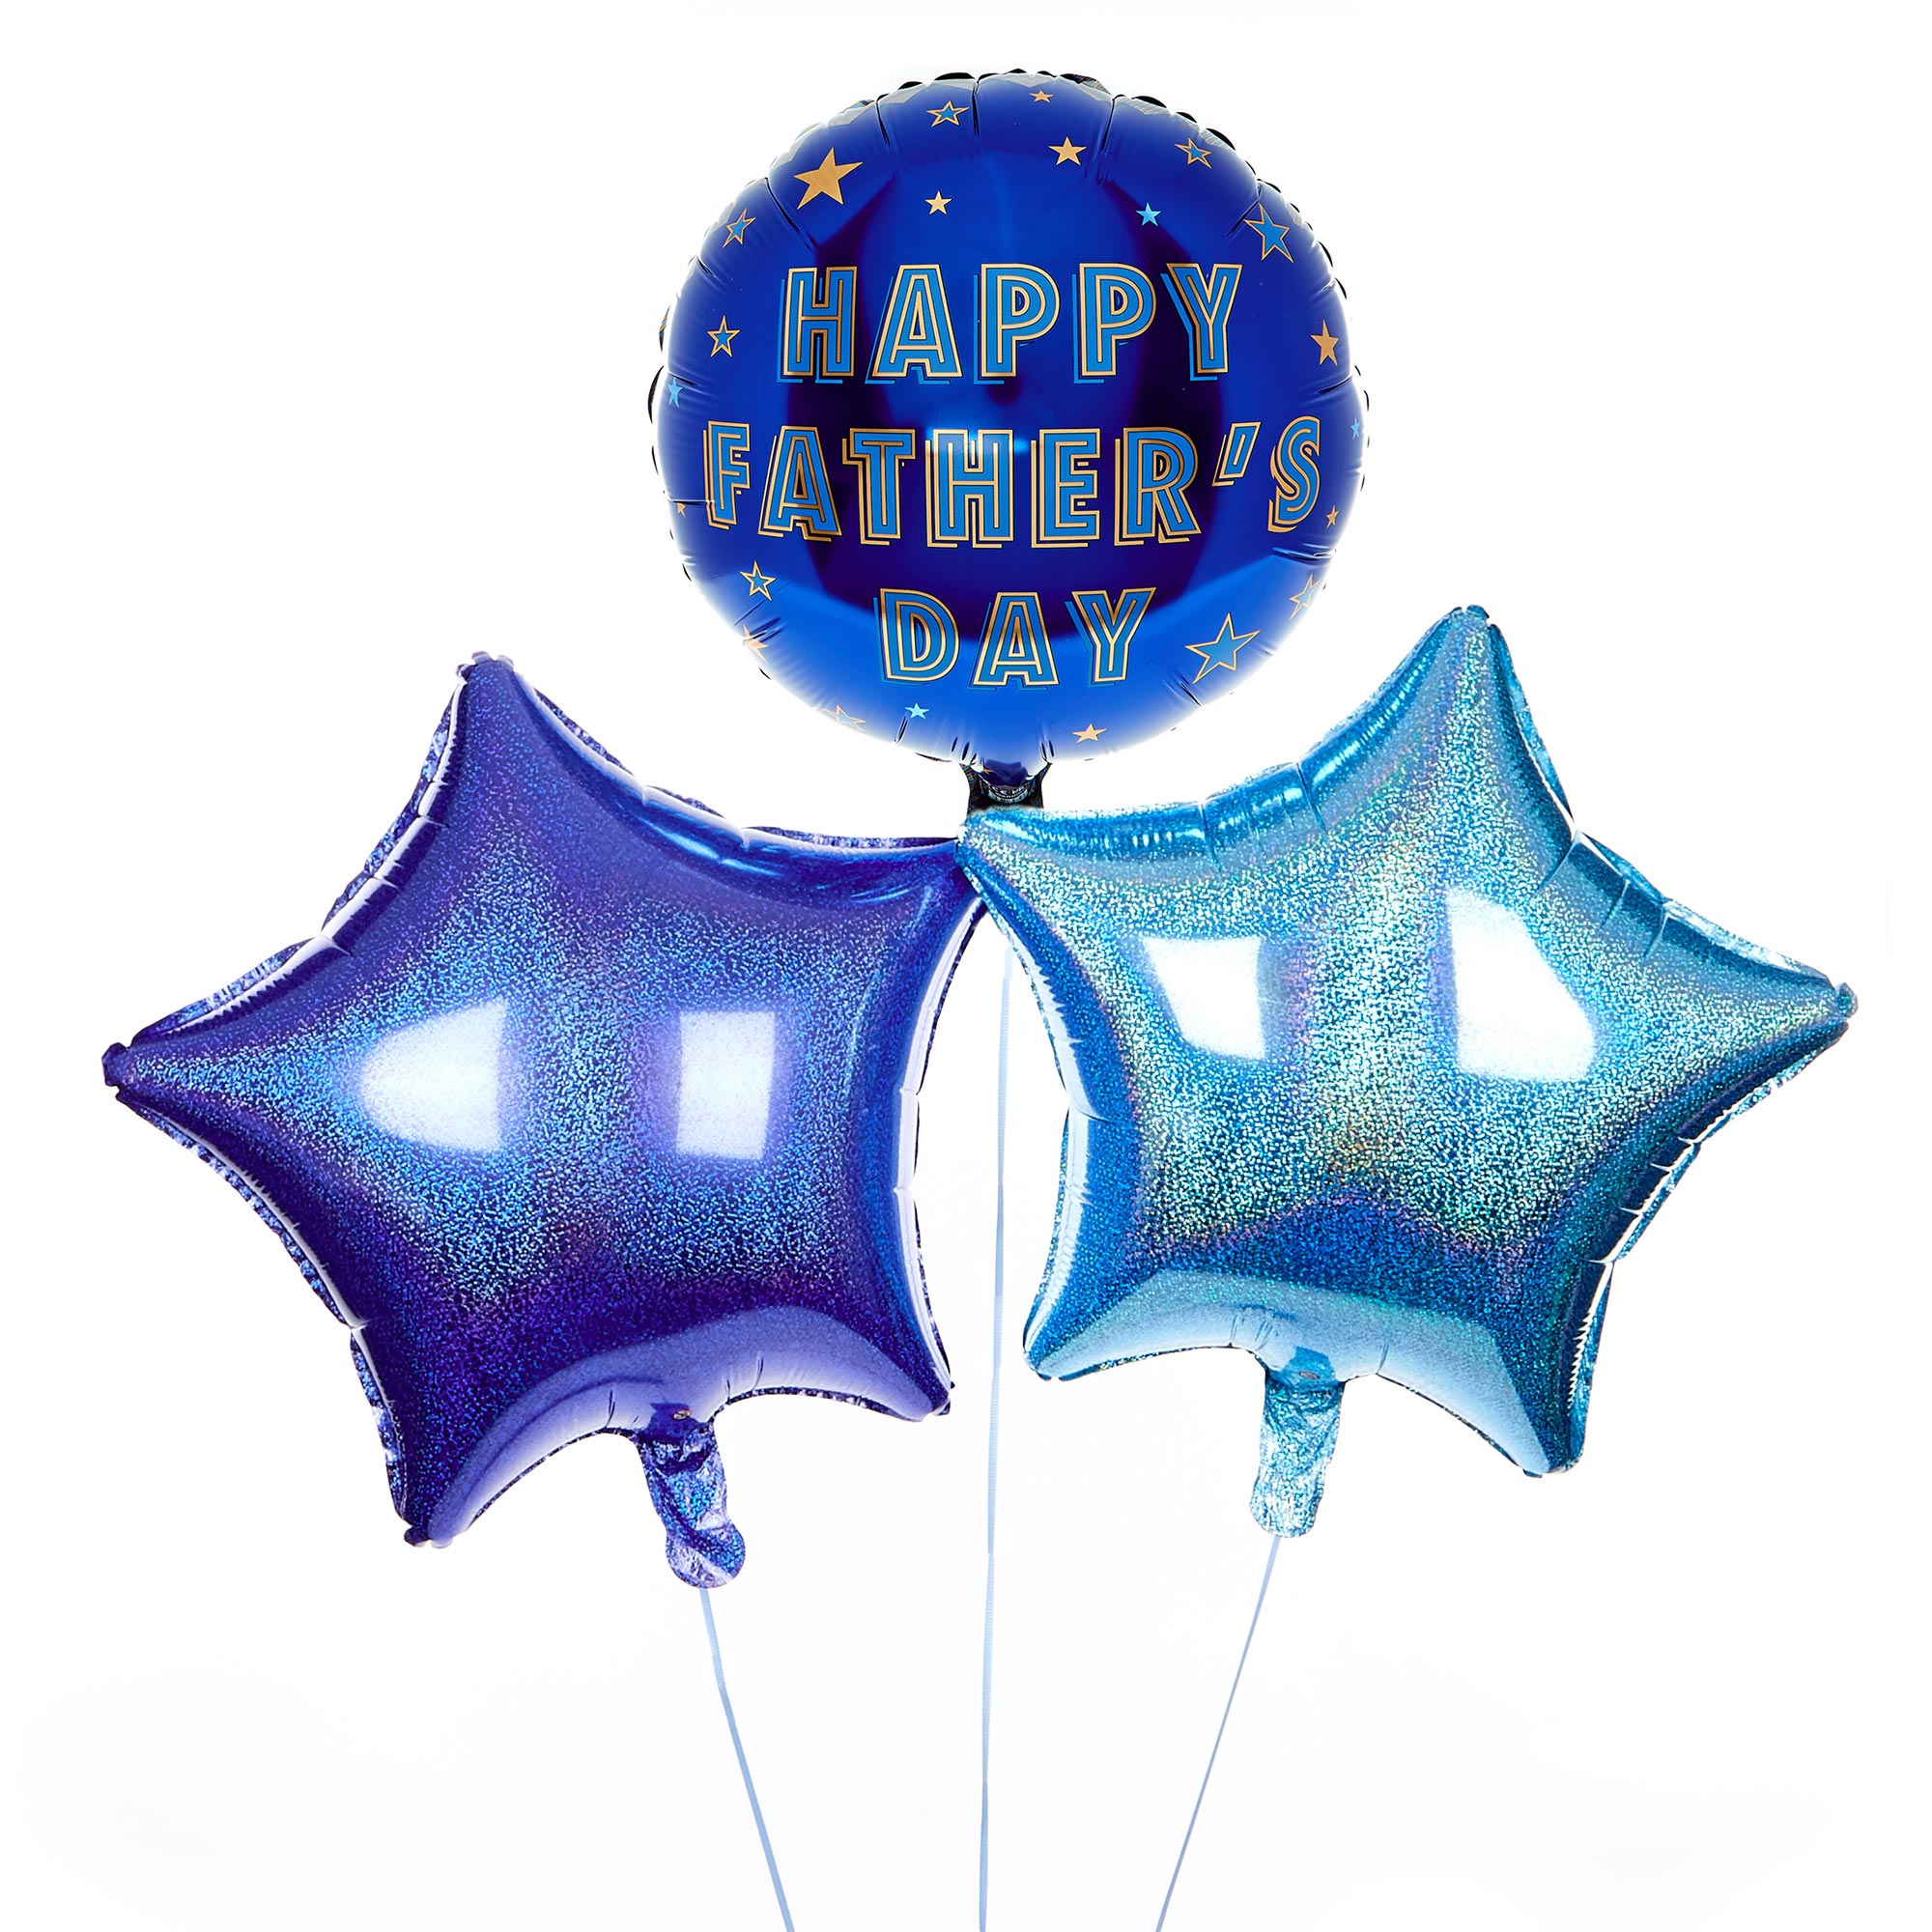 Happy Father's Day Balloon Bouquet - DELIVERED INFLATED!